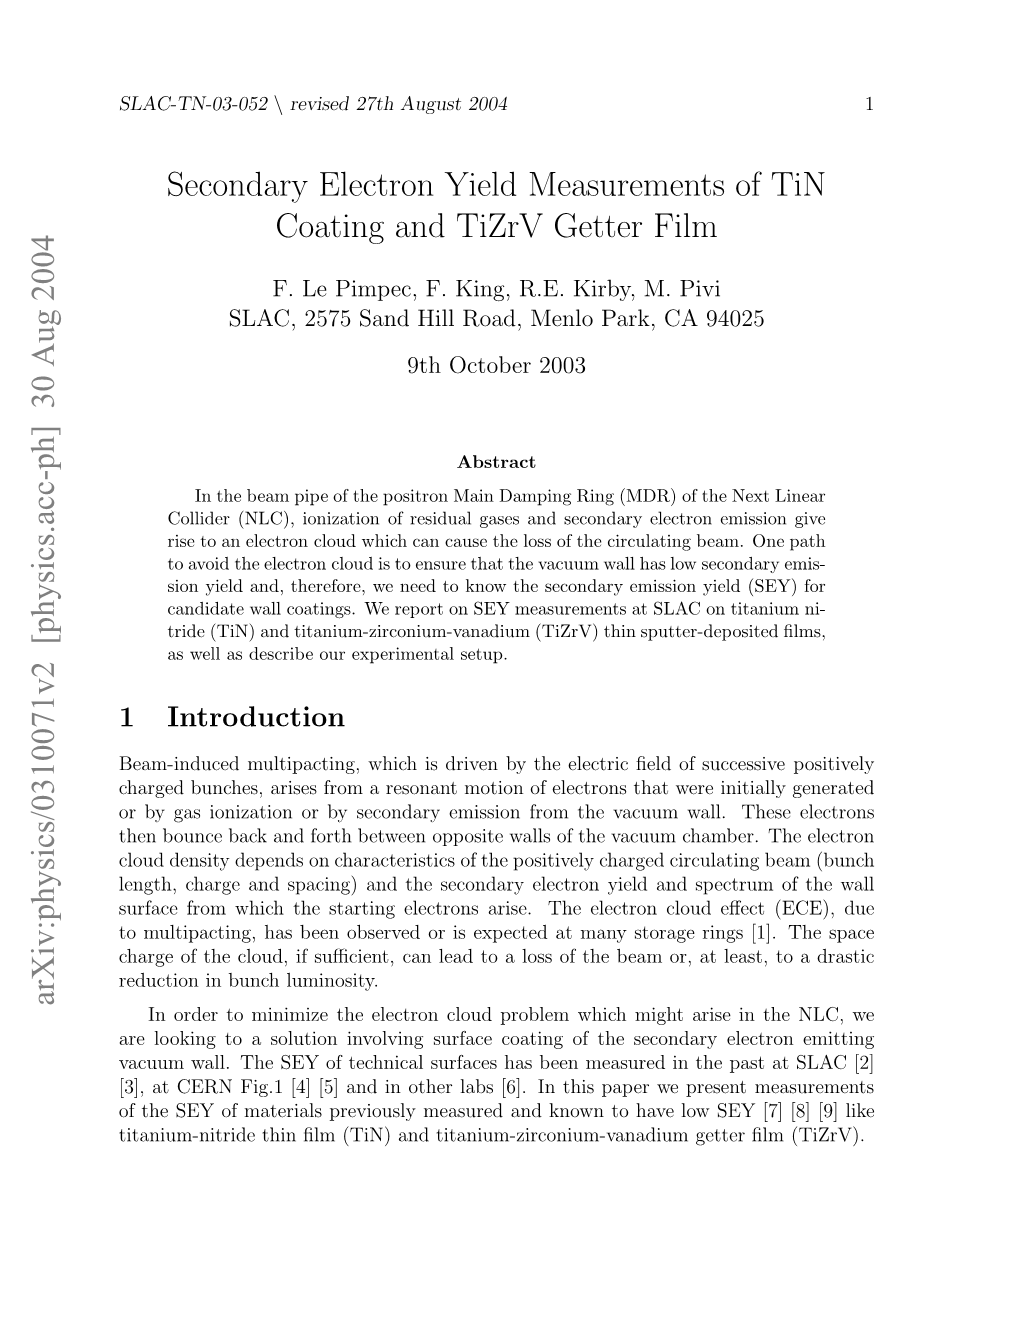 30 Aug 2004 Secondary Electron Yield Measurements of Tin Coating